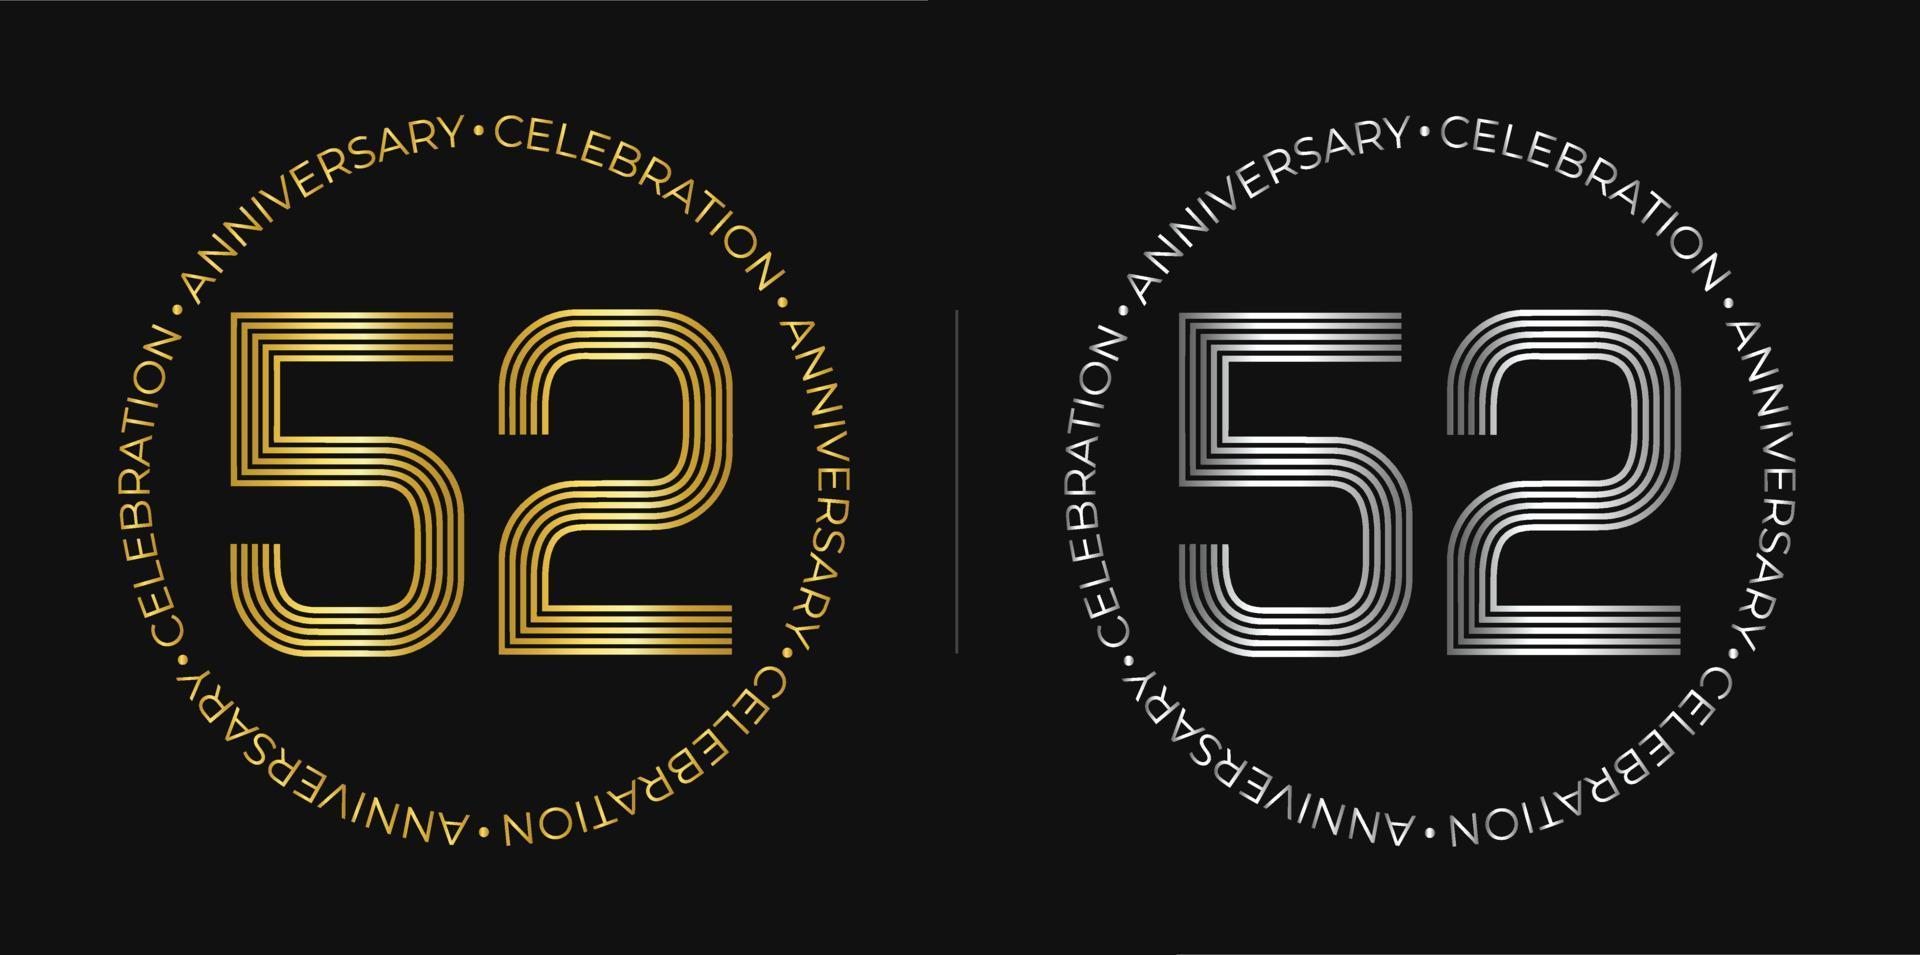 52th birthday. Fifty-two years anniversary celebration banner in golden and silver colors. Circular logo with original numbers design in elegant lines. vector